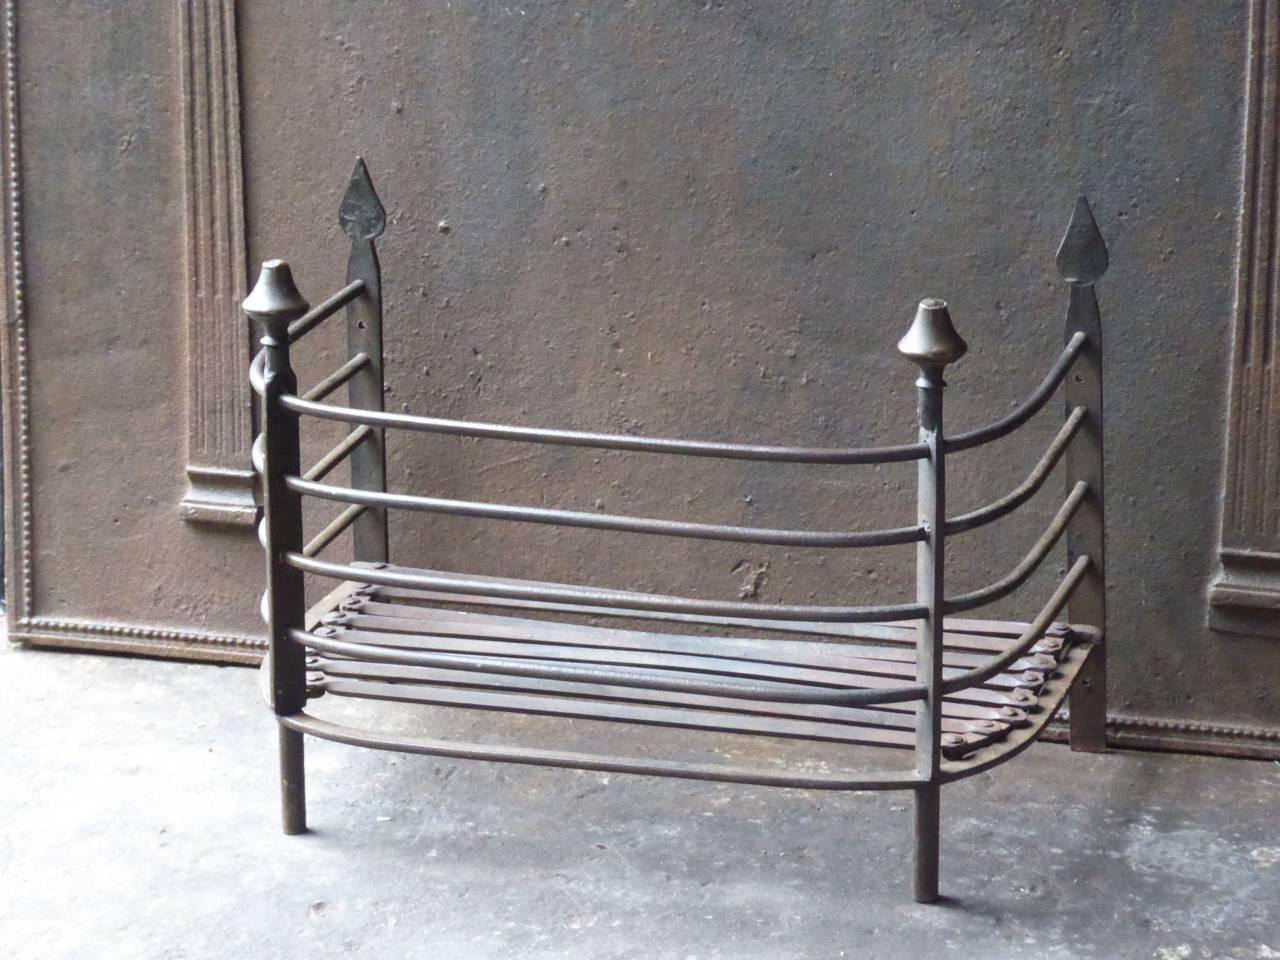 19th century Dutch fireplace grate made of wrought iron and brass.